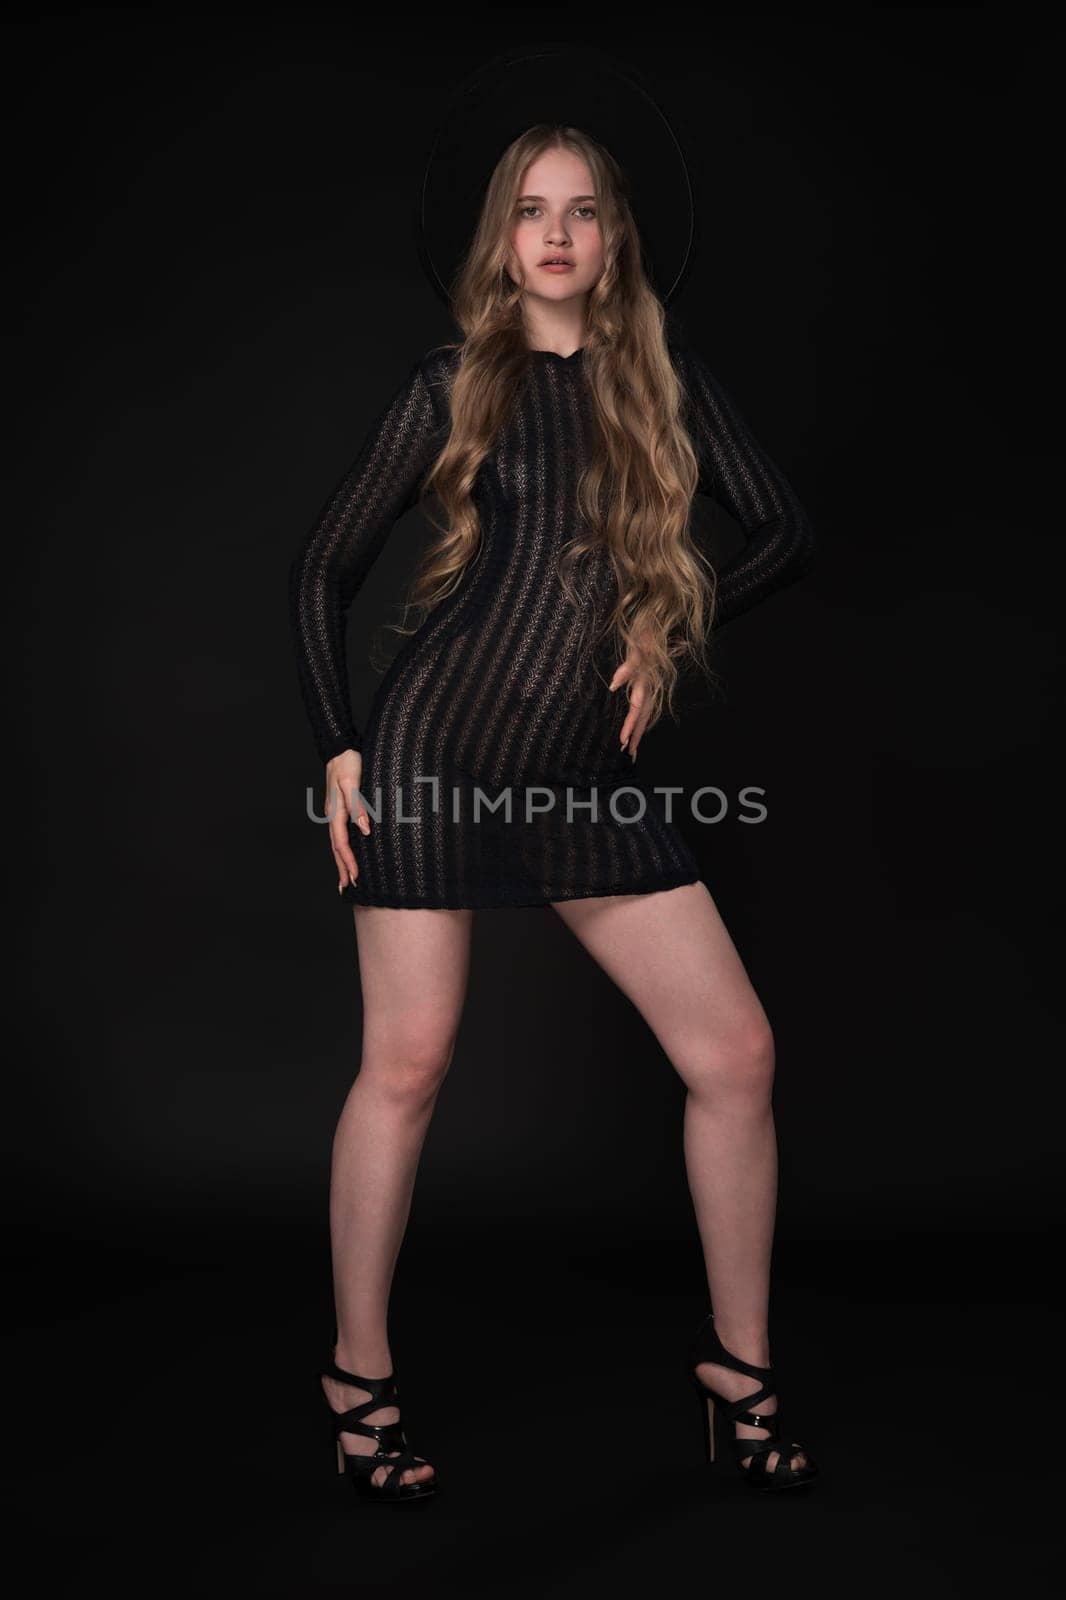 Woman in full length exudes confidence and poise. Her long legs are accentuated as she strikes pose on black background. Model wears black short knitted tight dress, felt hat and high-heeled shoes